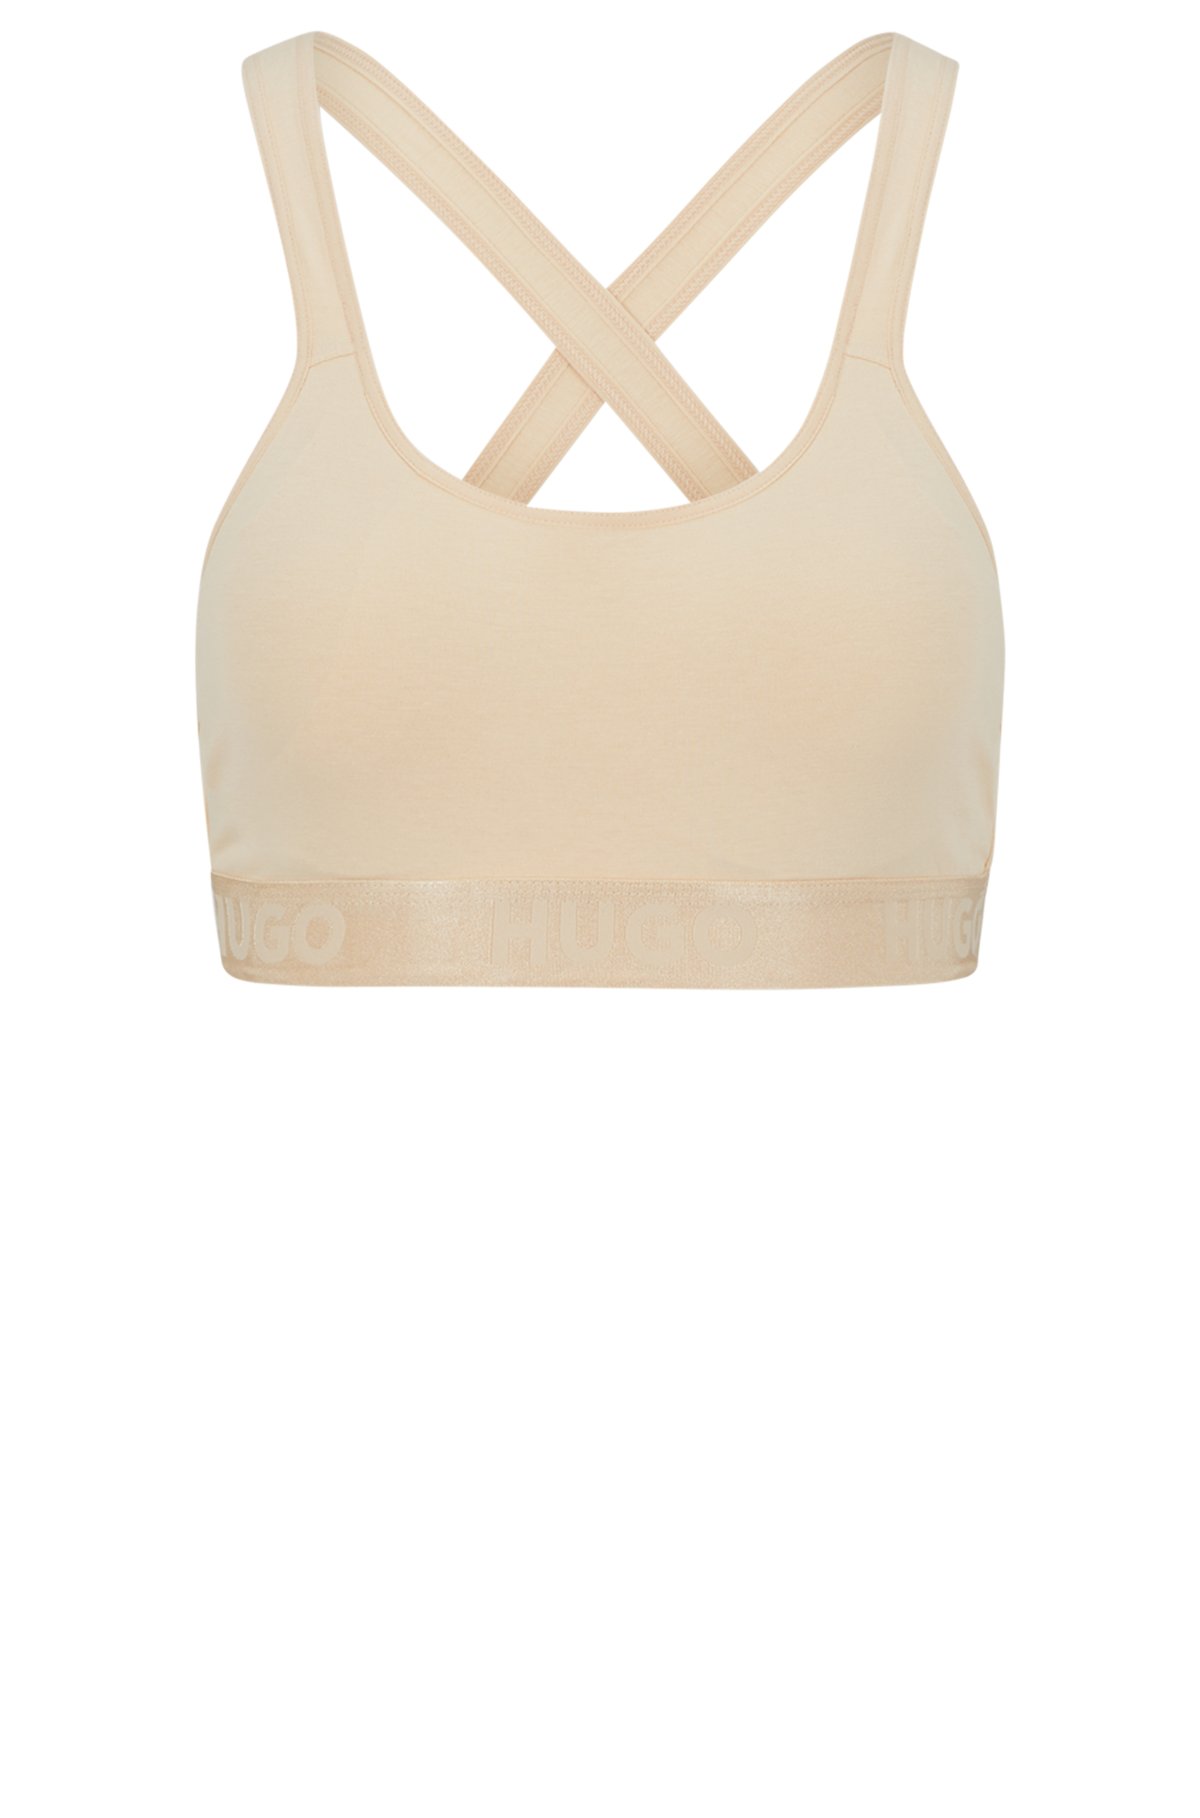 HUGO - Bralette in stretch cotton with repeat logos